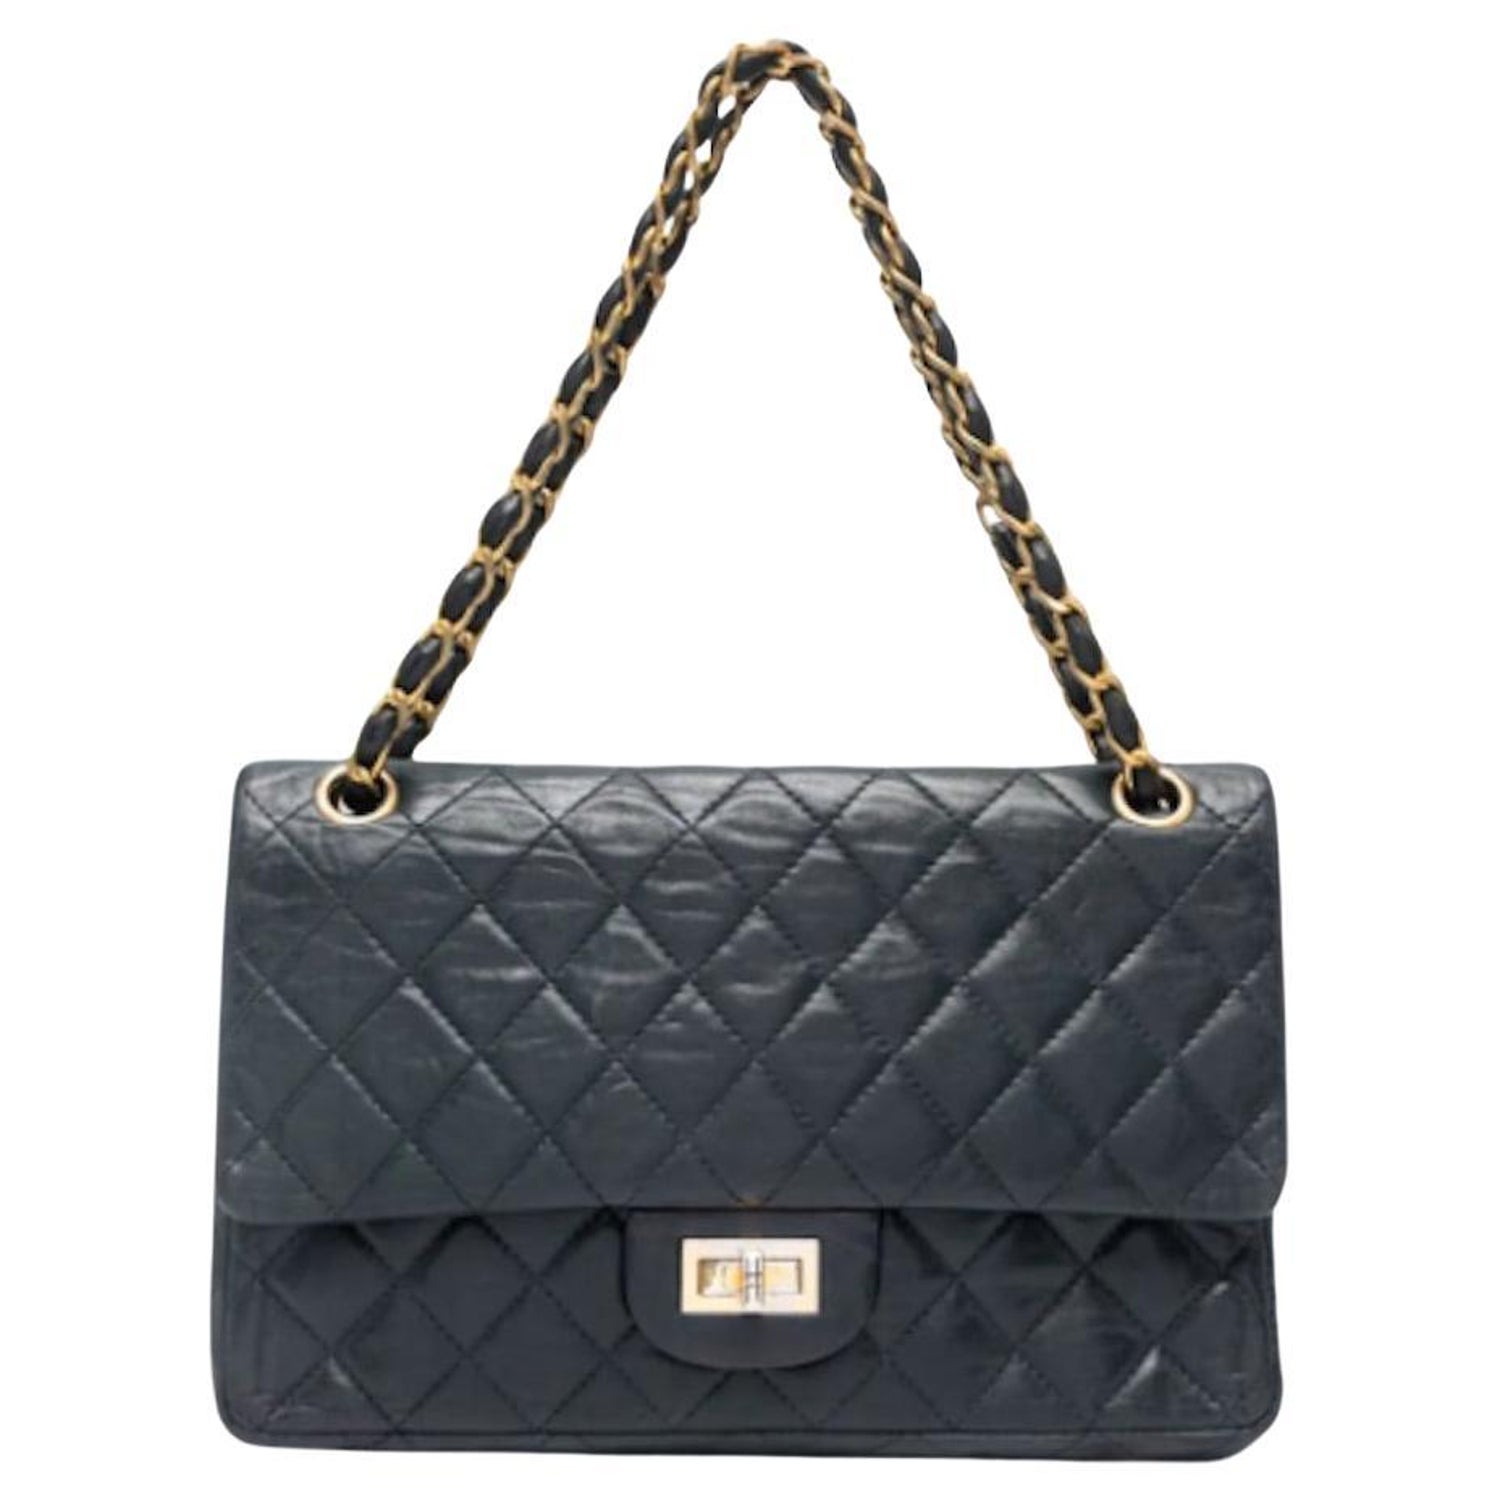 Sold at Auction: CHANEL Vintage handbag, approx. 1960/65